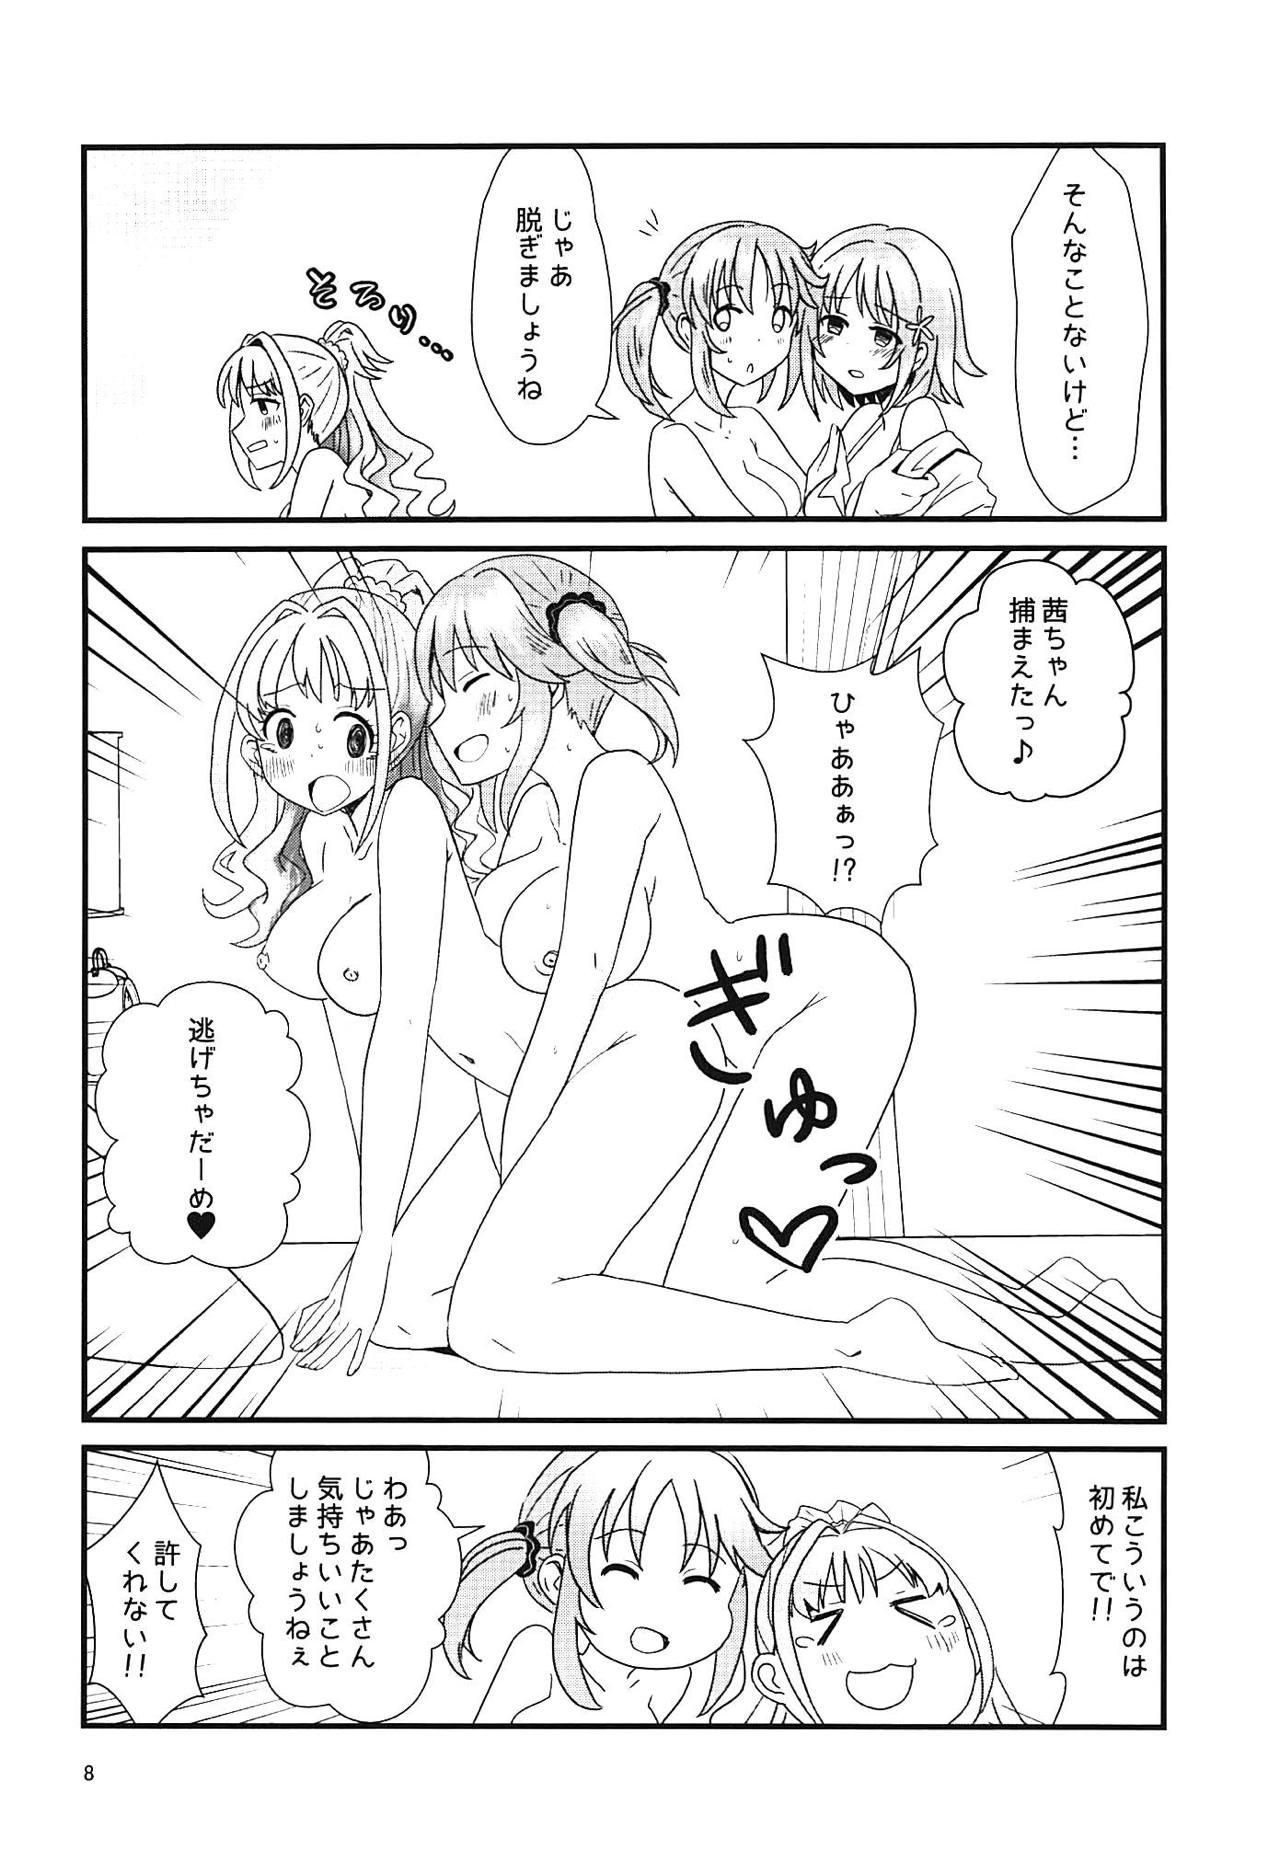 With Yugami no Tobira - The idolmaster Pregnant - Page 7